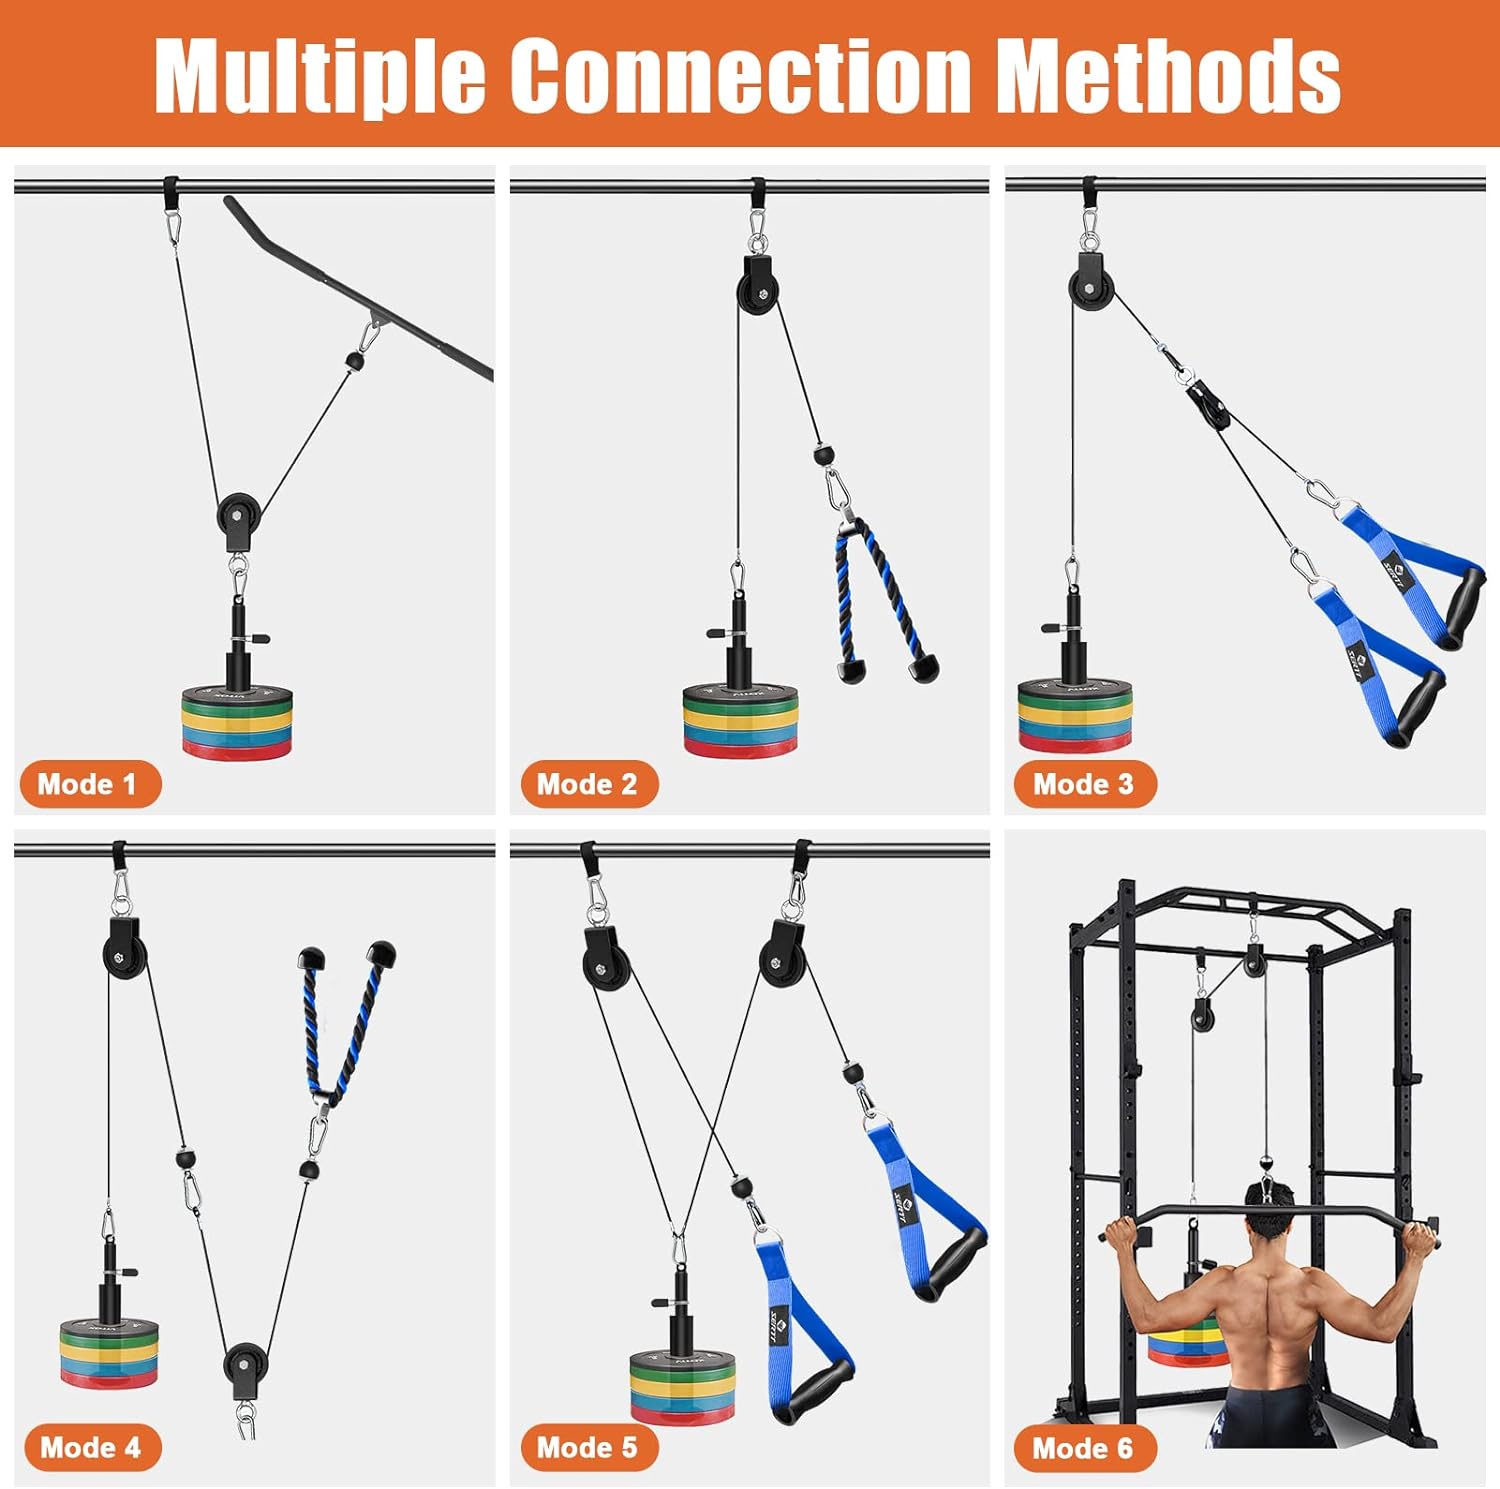 SERTT Home Gym Pulley System, Tricep Workout Pulley System for LAT Pulldown, Biceps Curl, Triceps, Shoulders, Back, Forearm Workout, Weight Cable Pulley System for Squat Rack, Garage